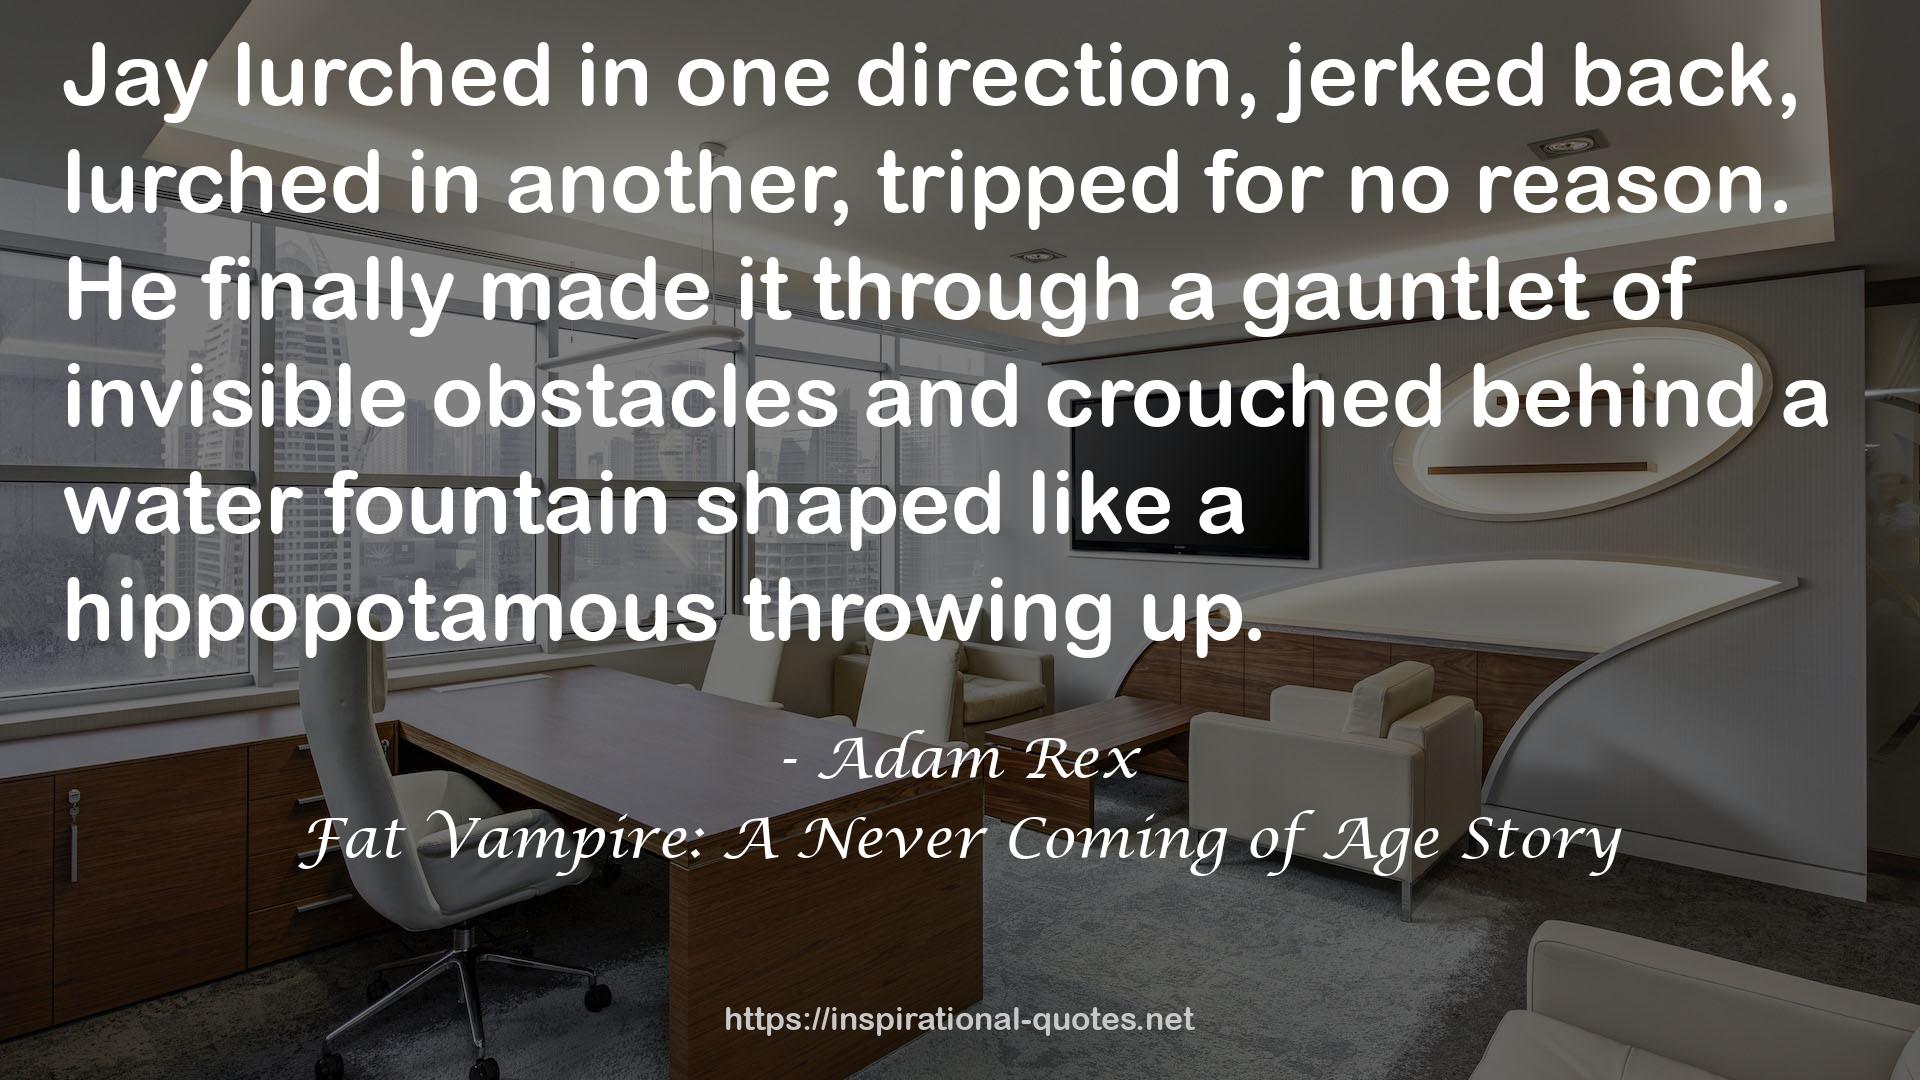 Fat Vampire: A Never Coming of Age Story QUOTES